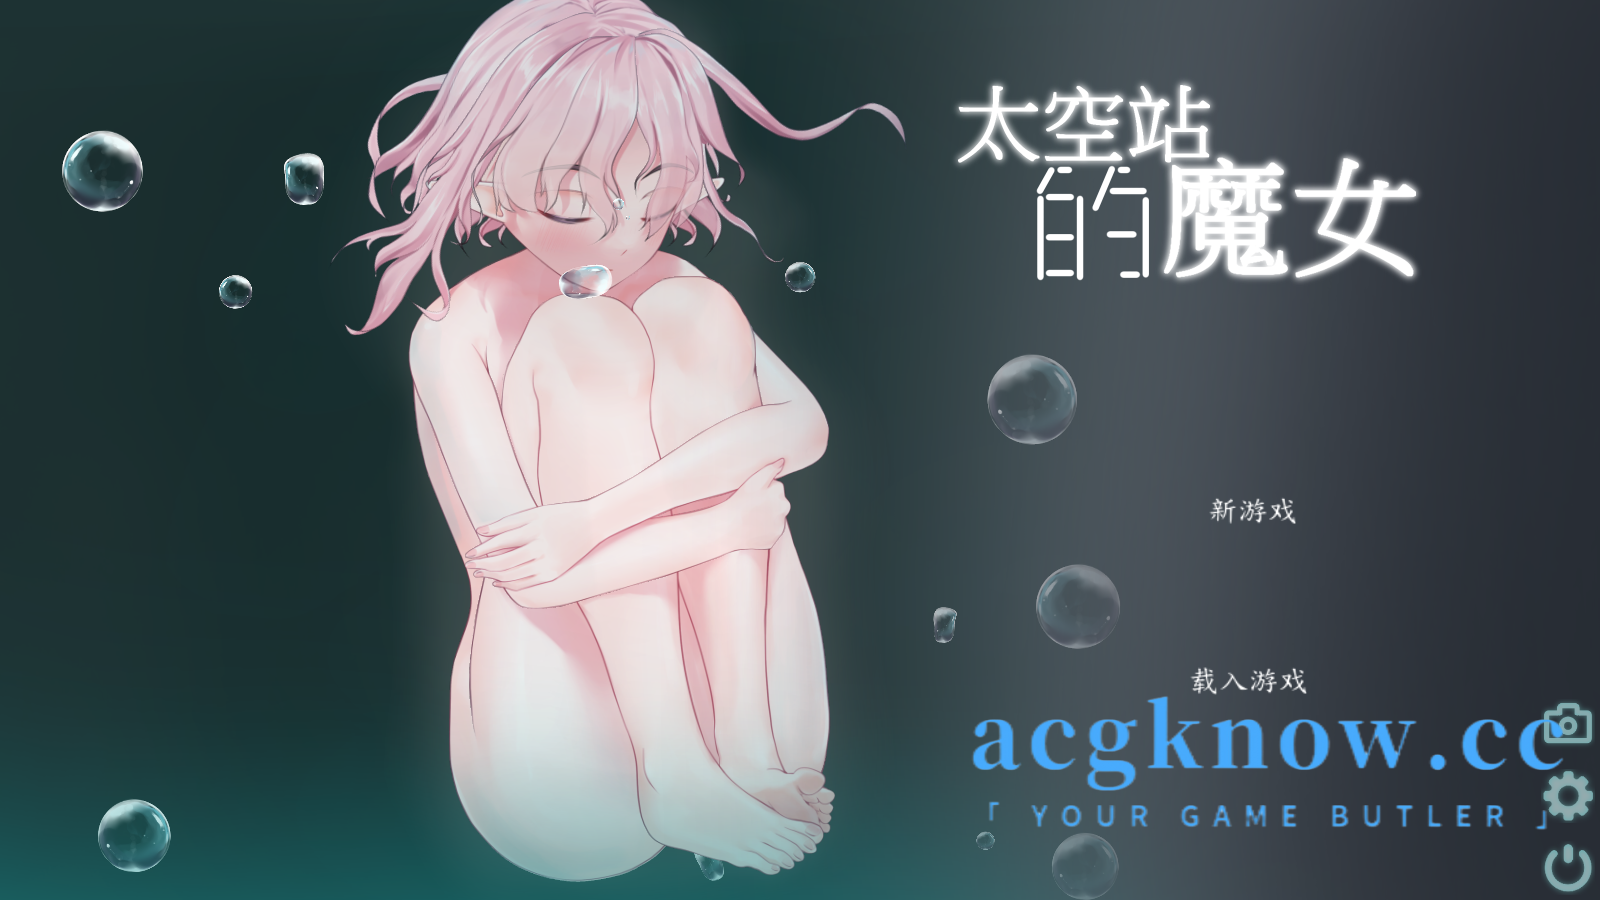 [PC][ACT/官方中文/新作]宇宙空间站的魔女 宇宙ステーションの魔女【200M】-acgknow